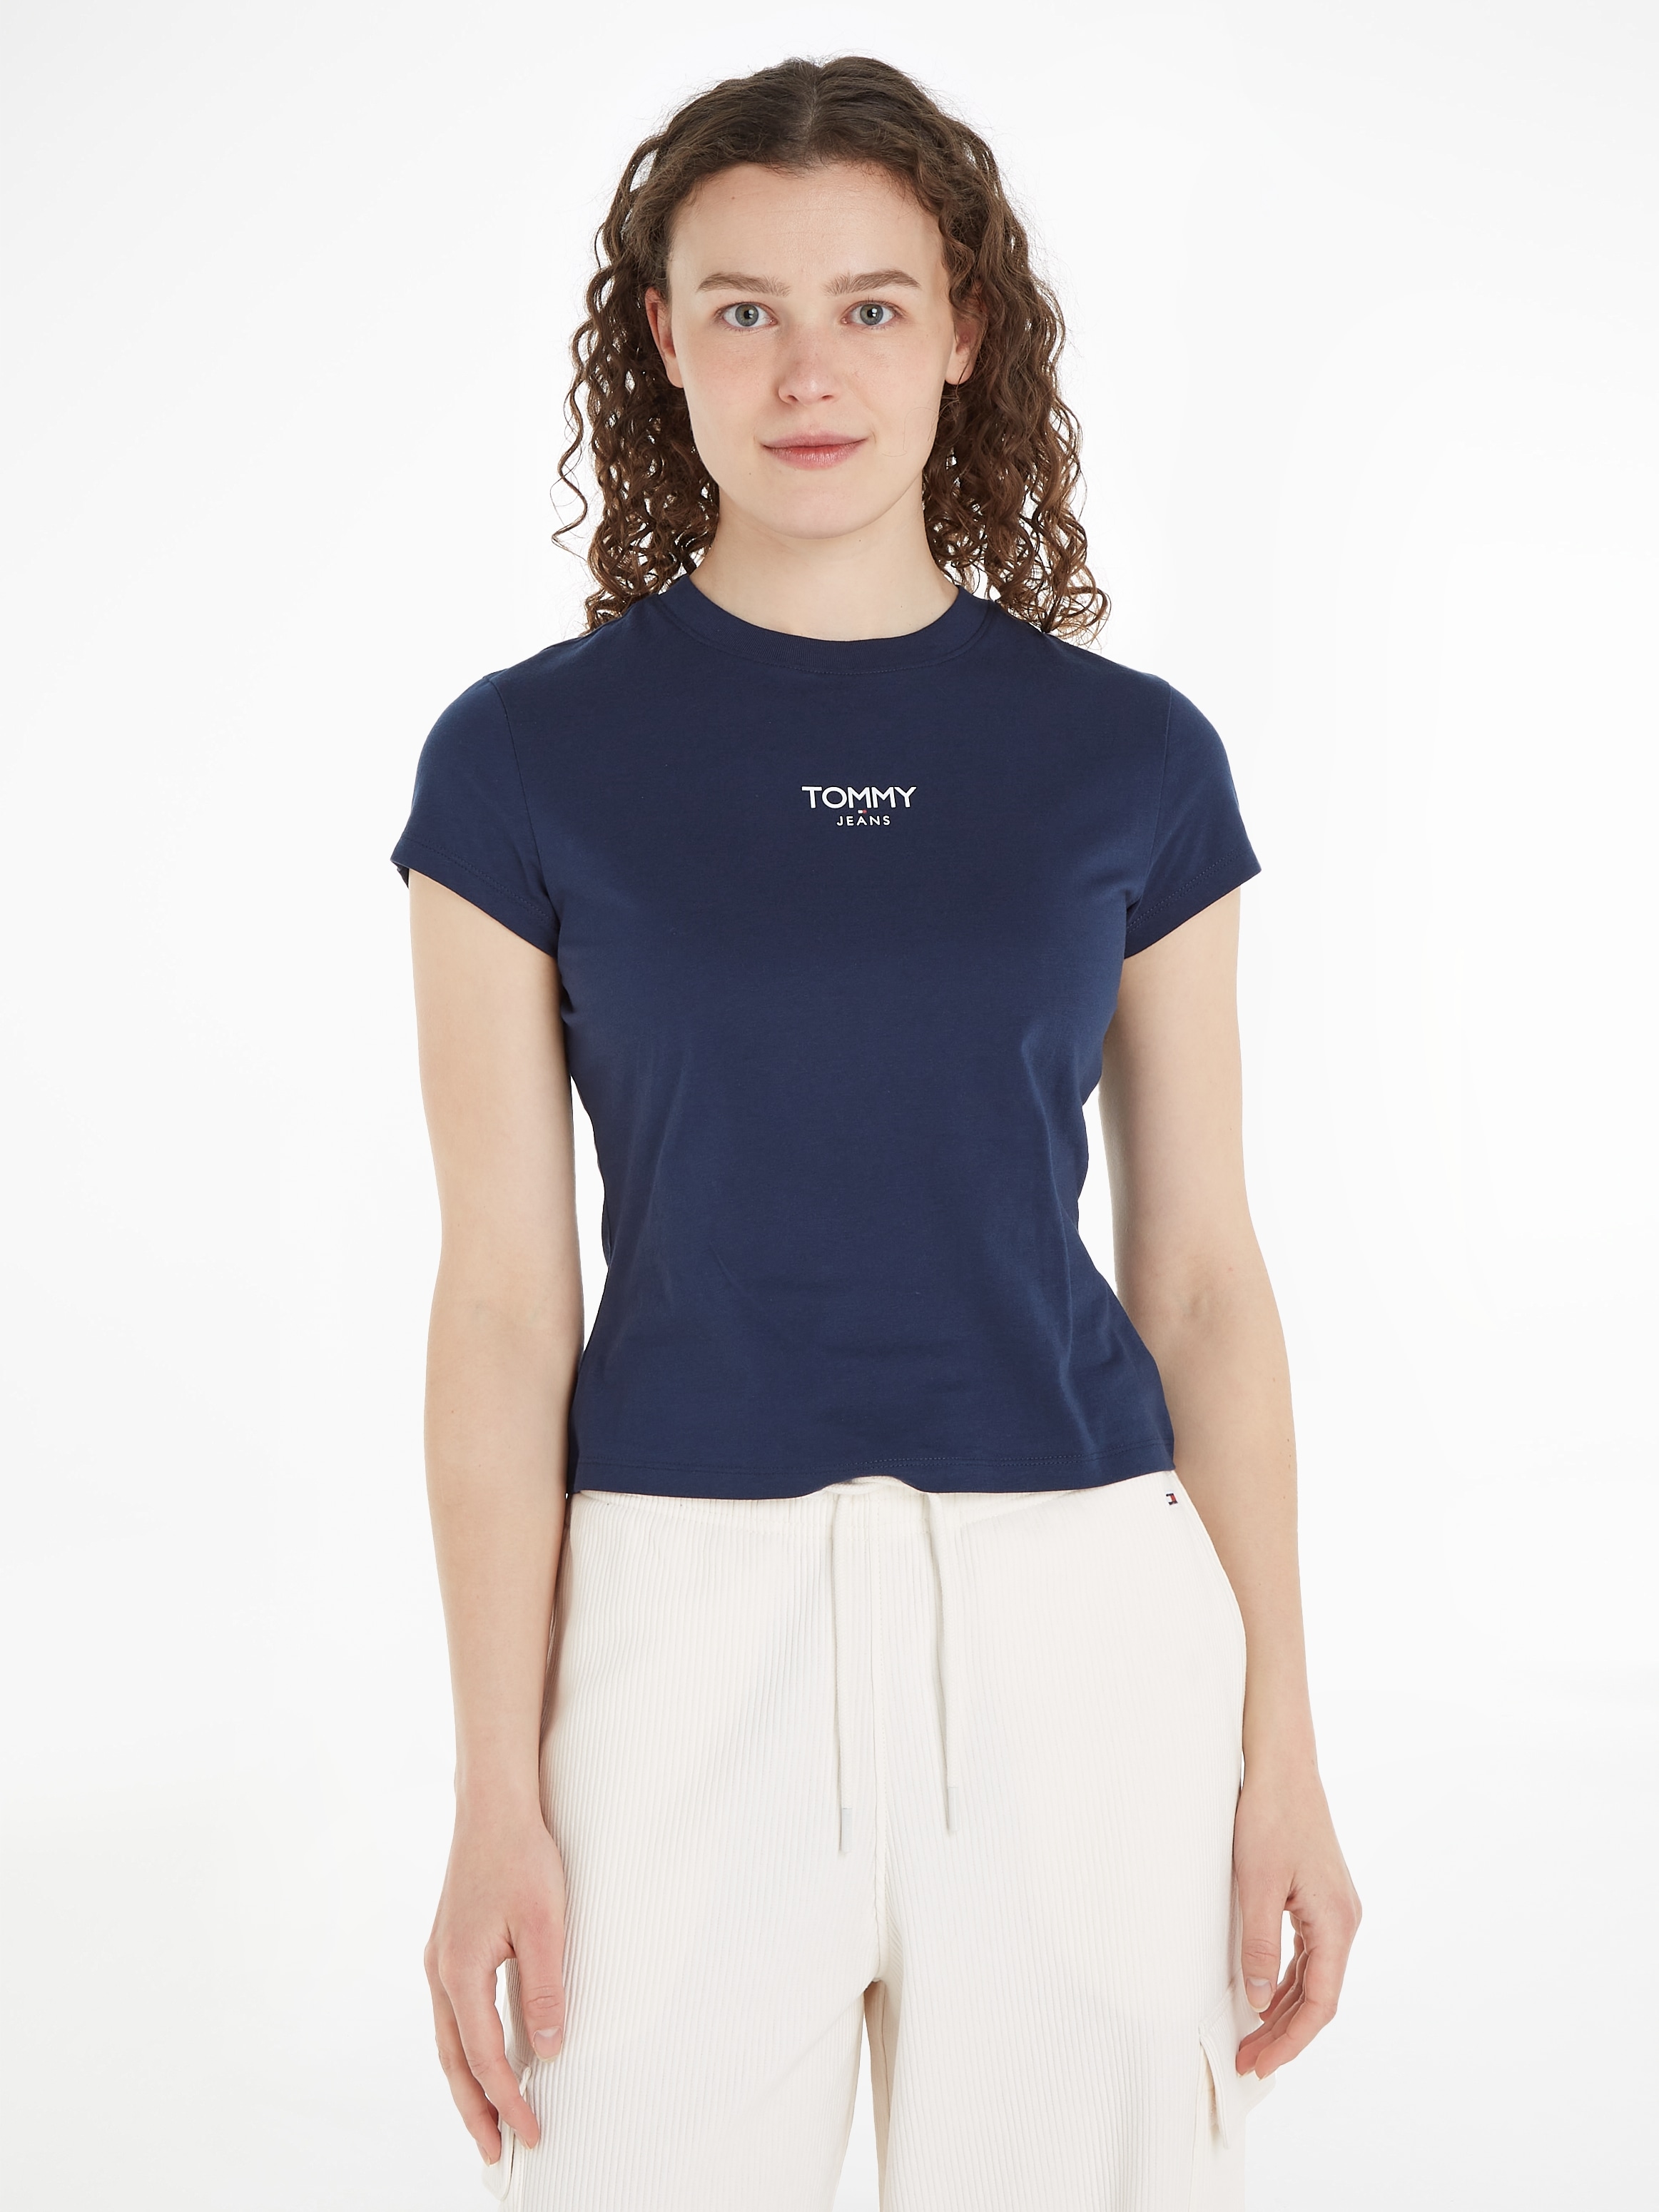 Tommy Jeans T-Shirt »TJW BBY ESSENTIAL LOGO 1 SS«, mit Tommy Jeans Logo bei  OTTOversand